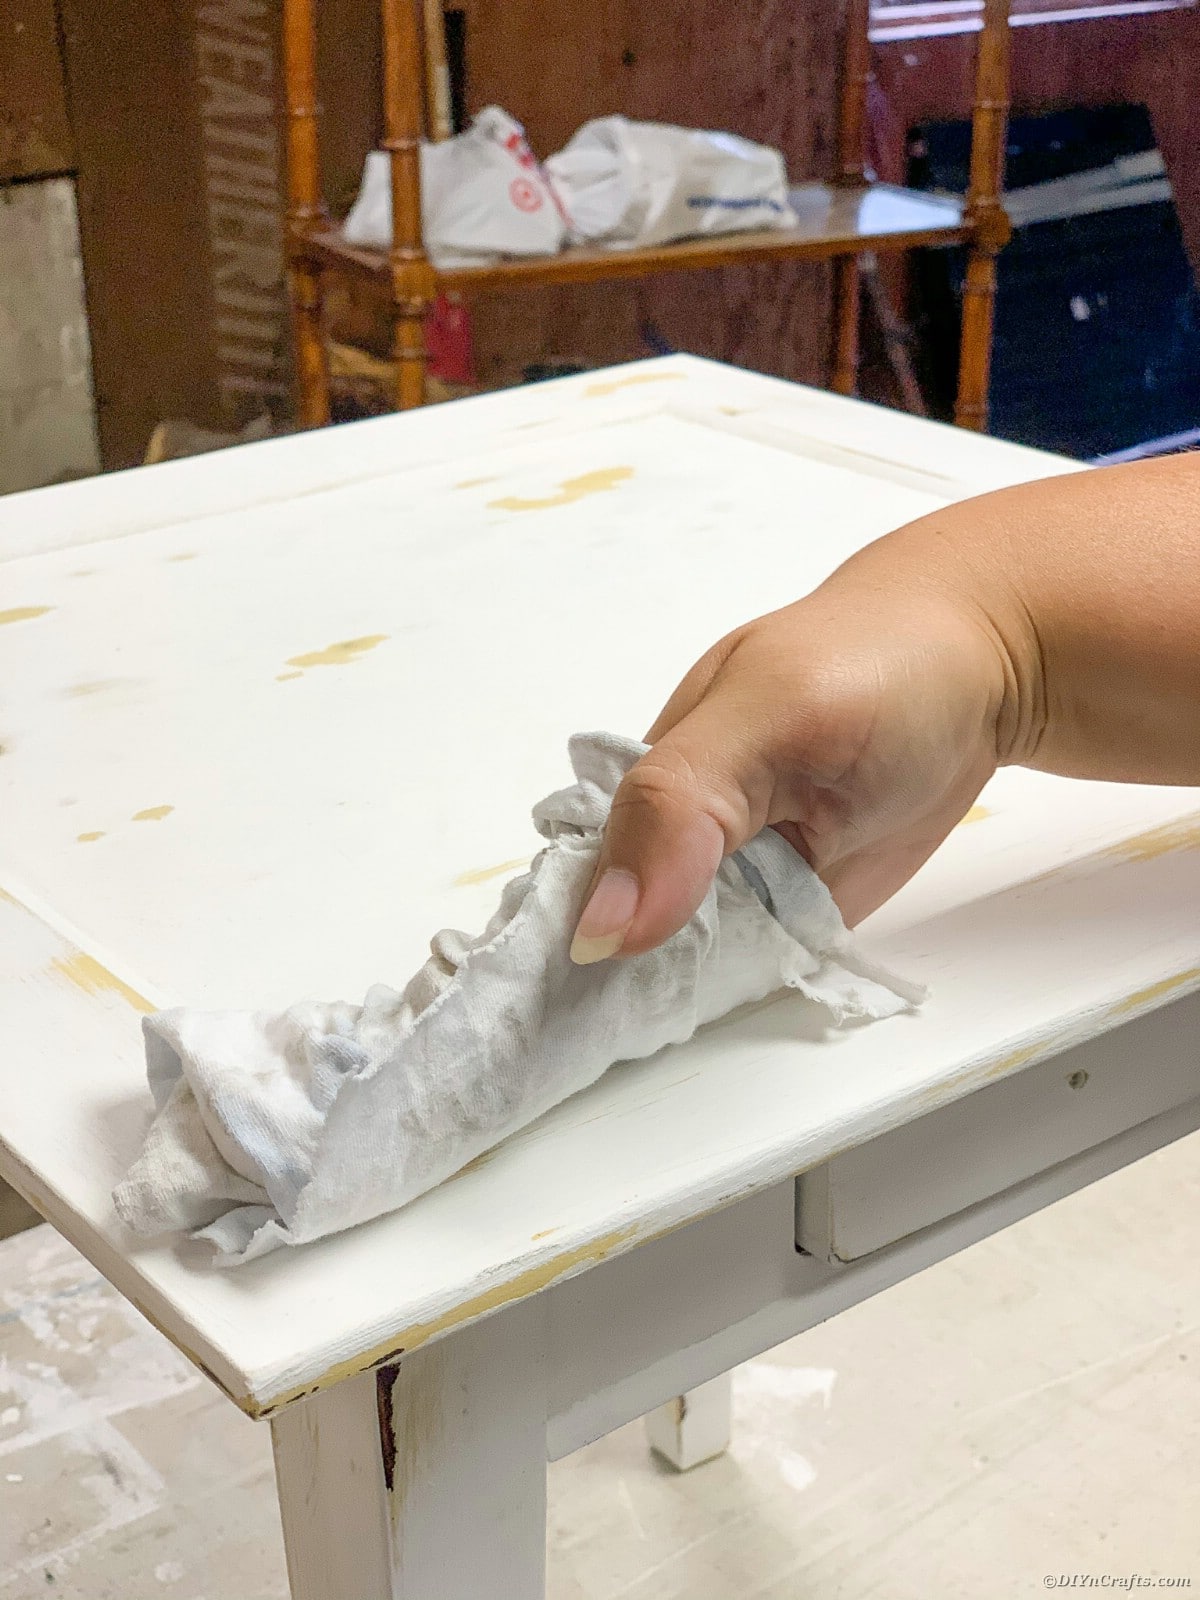 Rubbing cloth on table